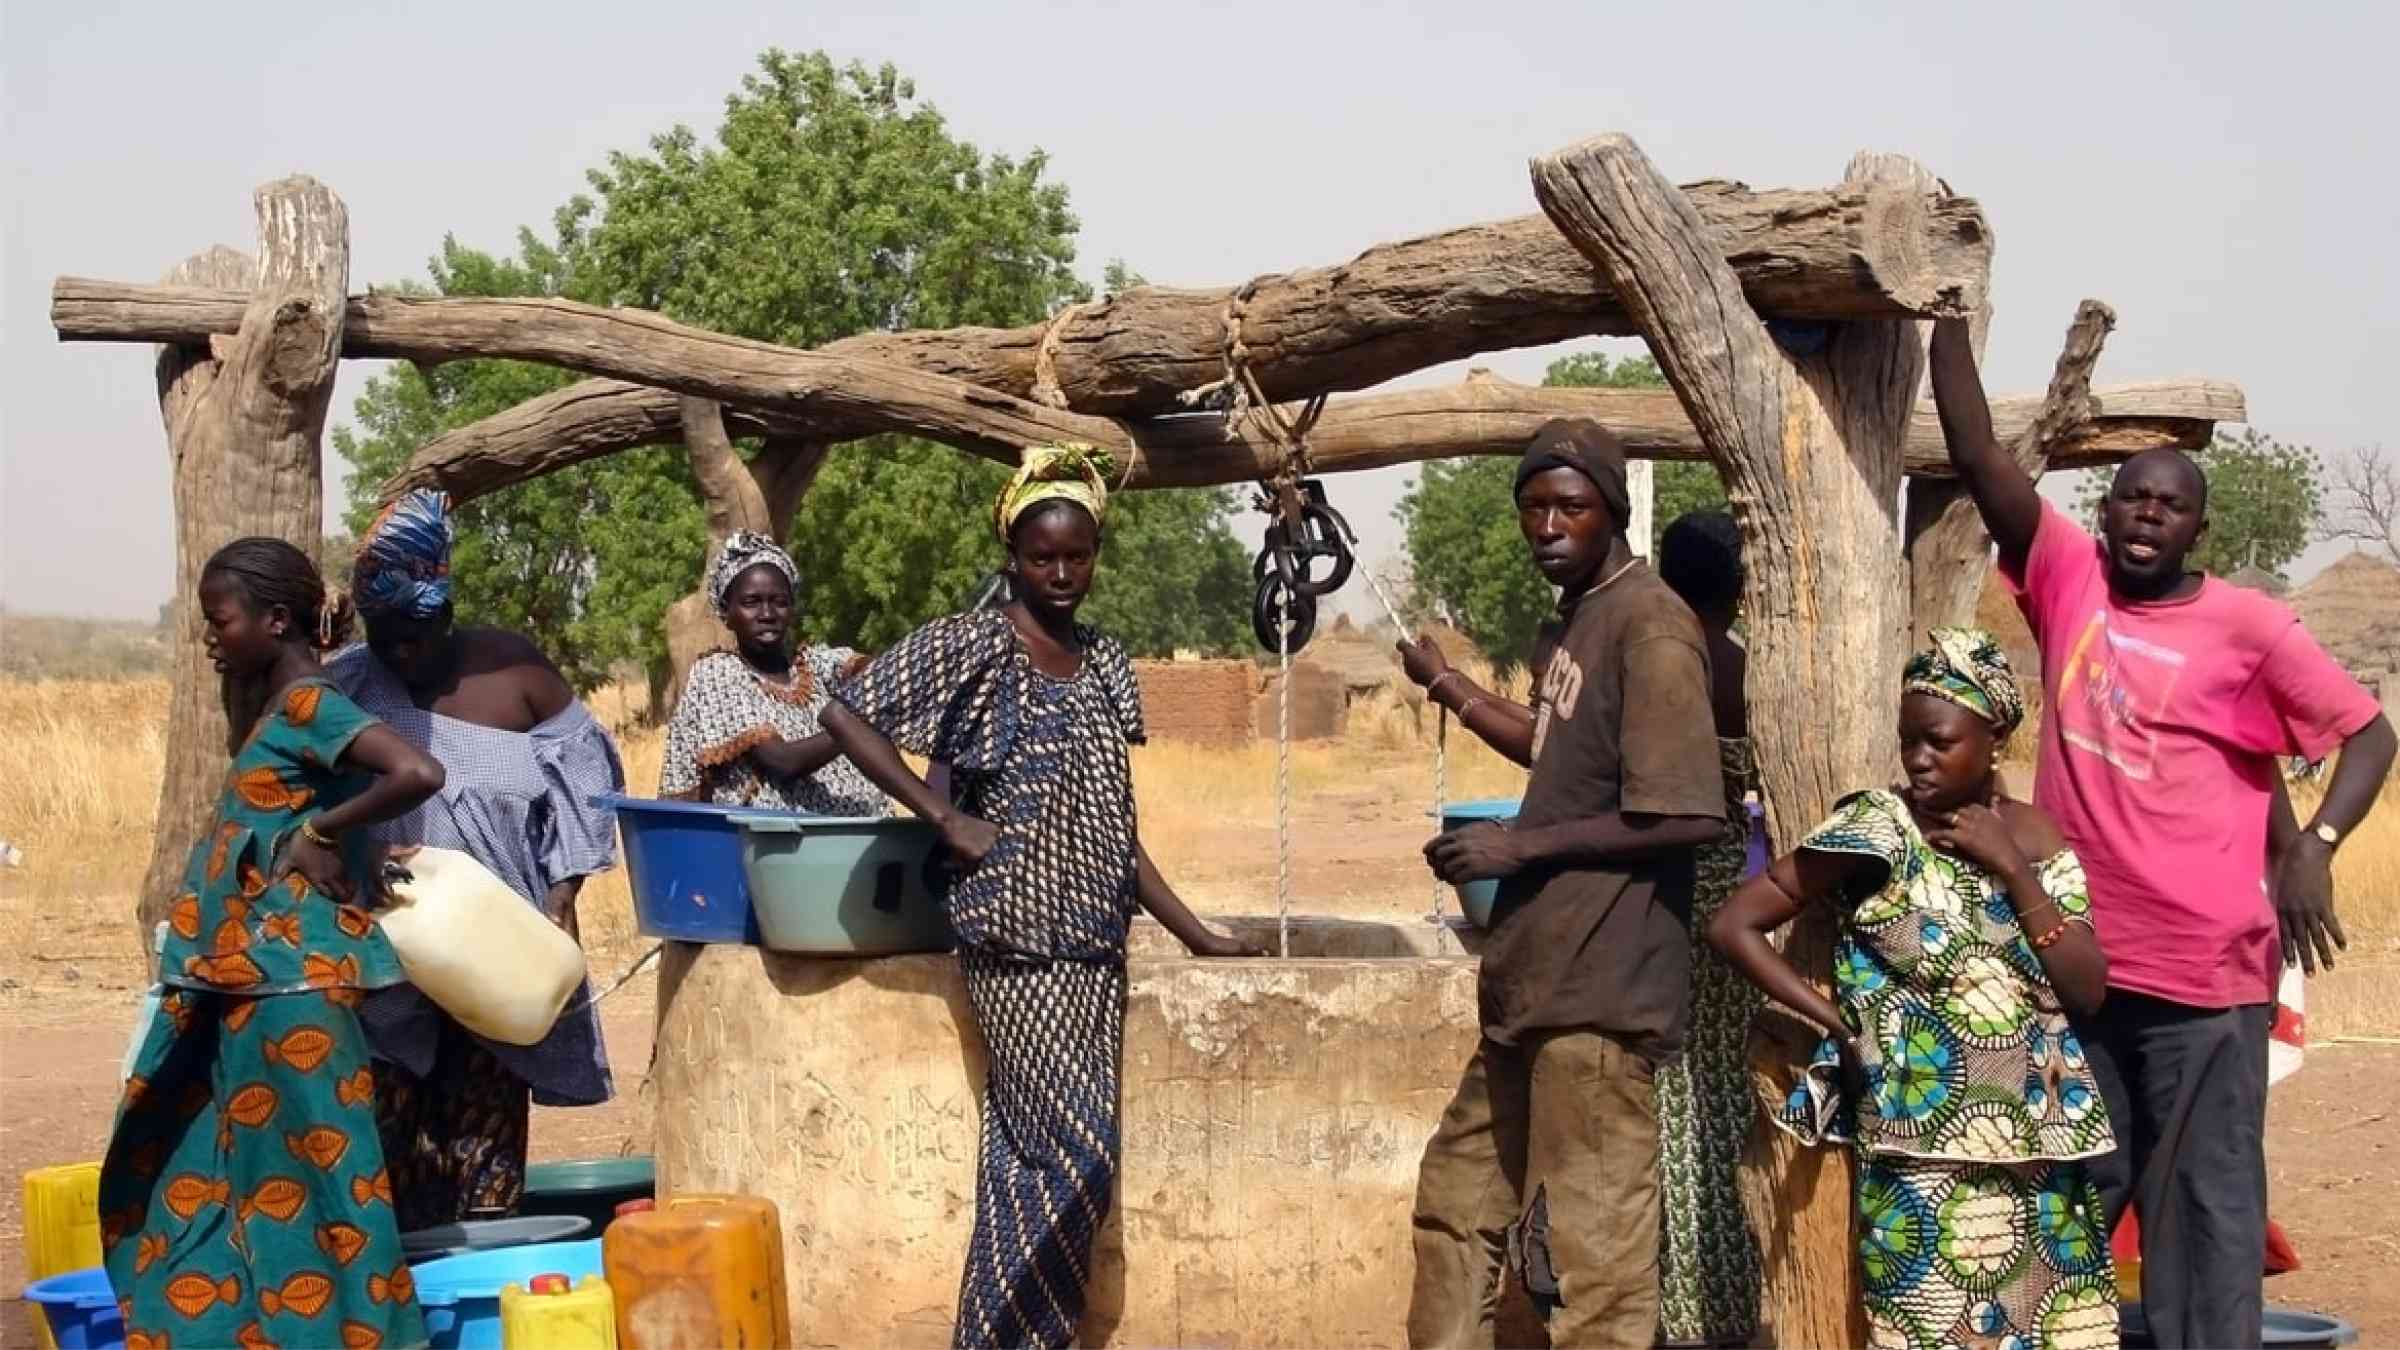 People working on water extraction around a well in Senegal (2007)